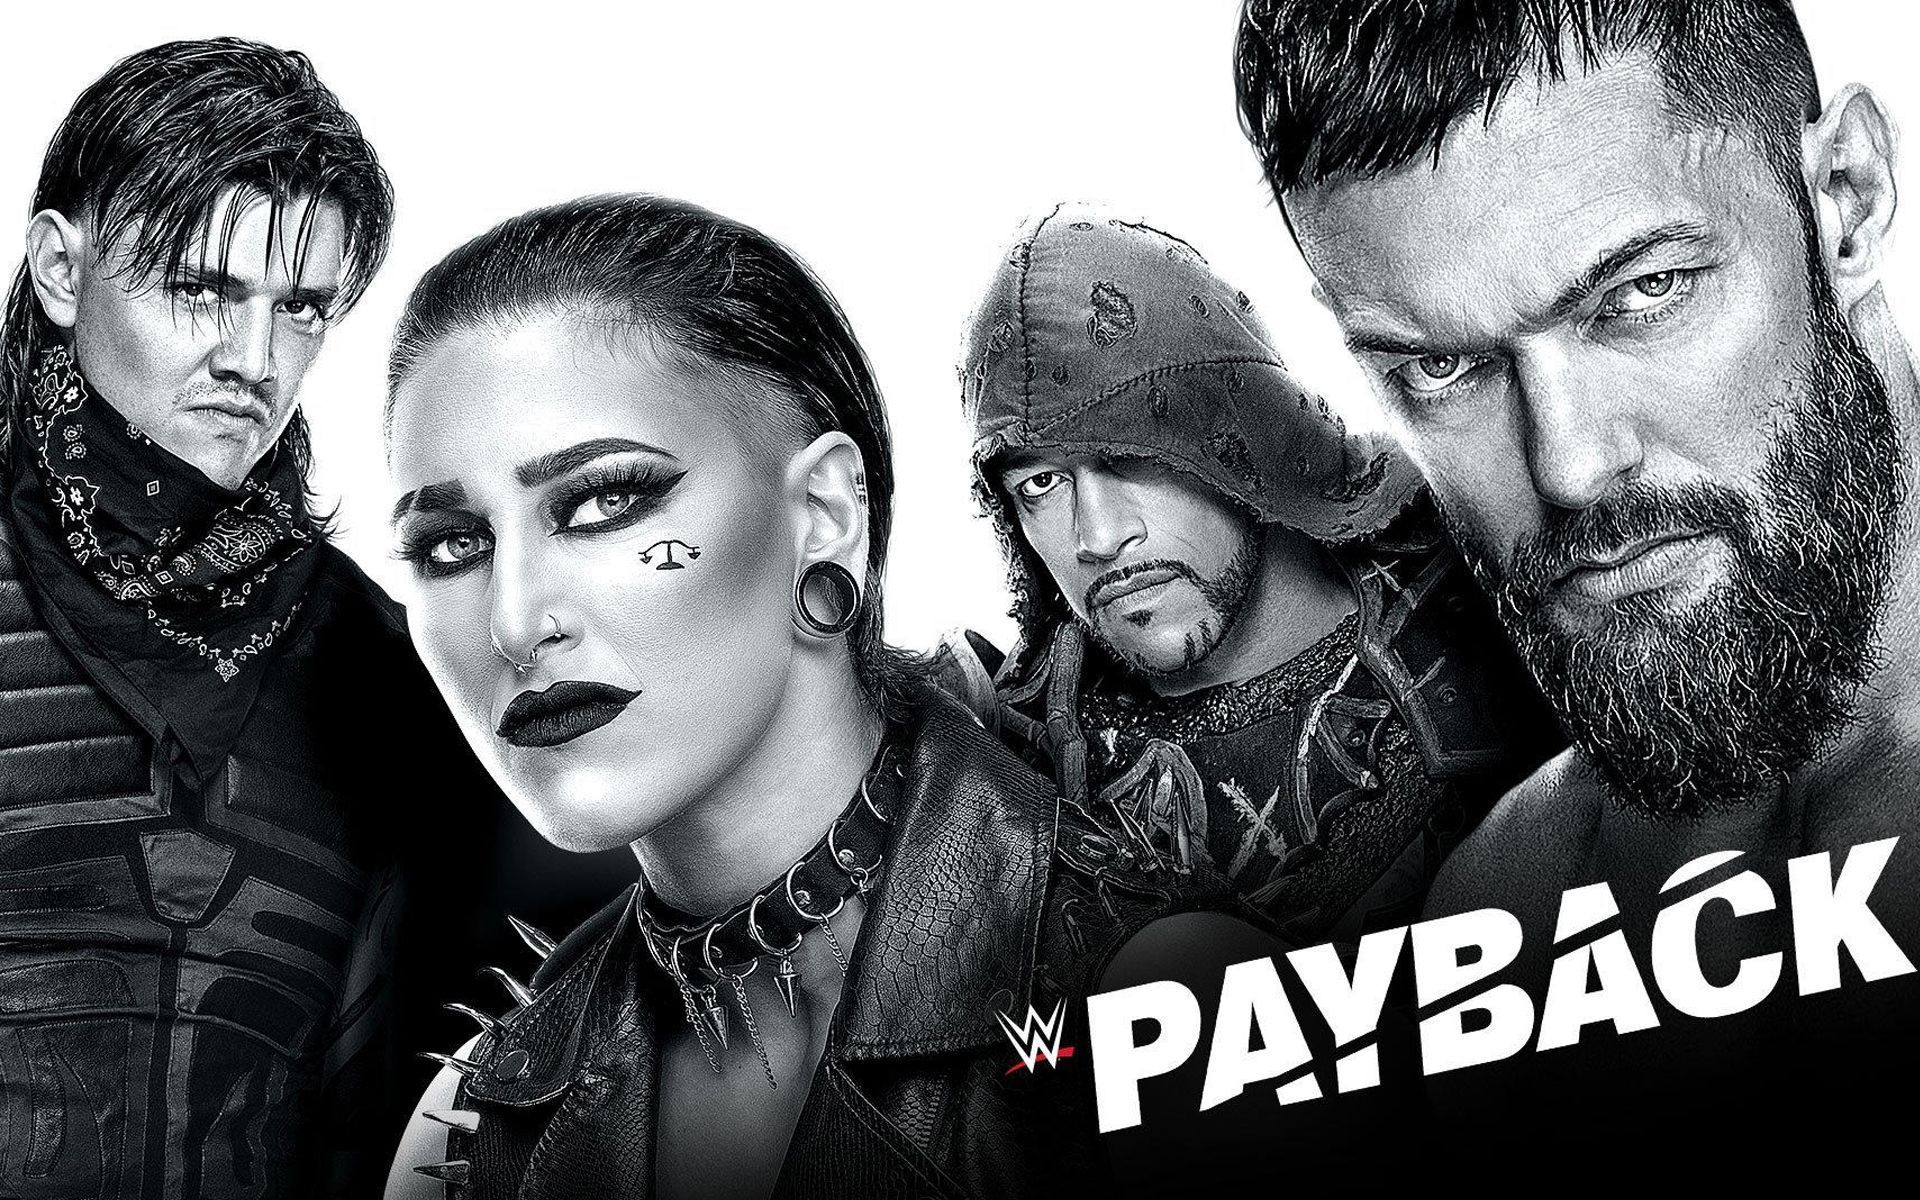 The Judgment Day members on Payback 2023 poster